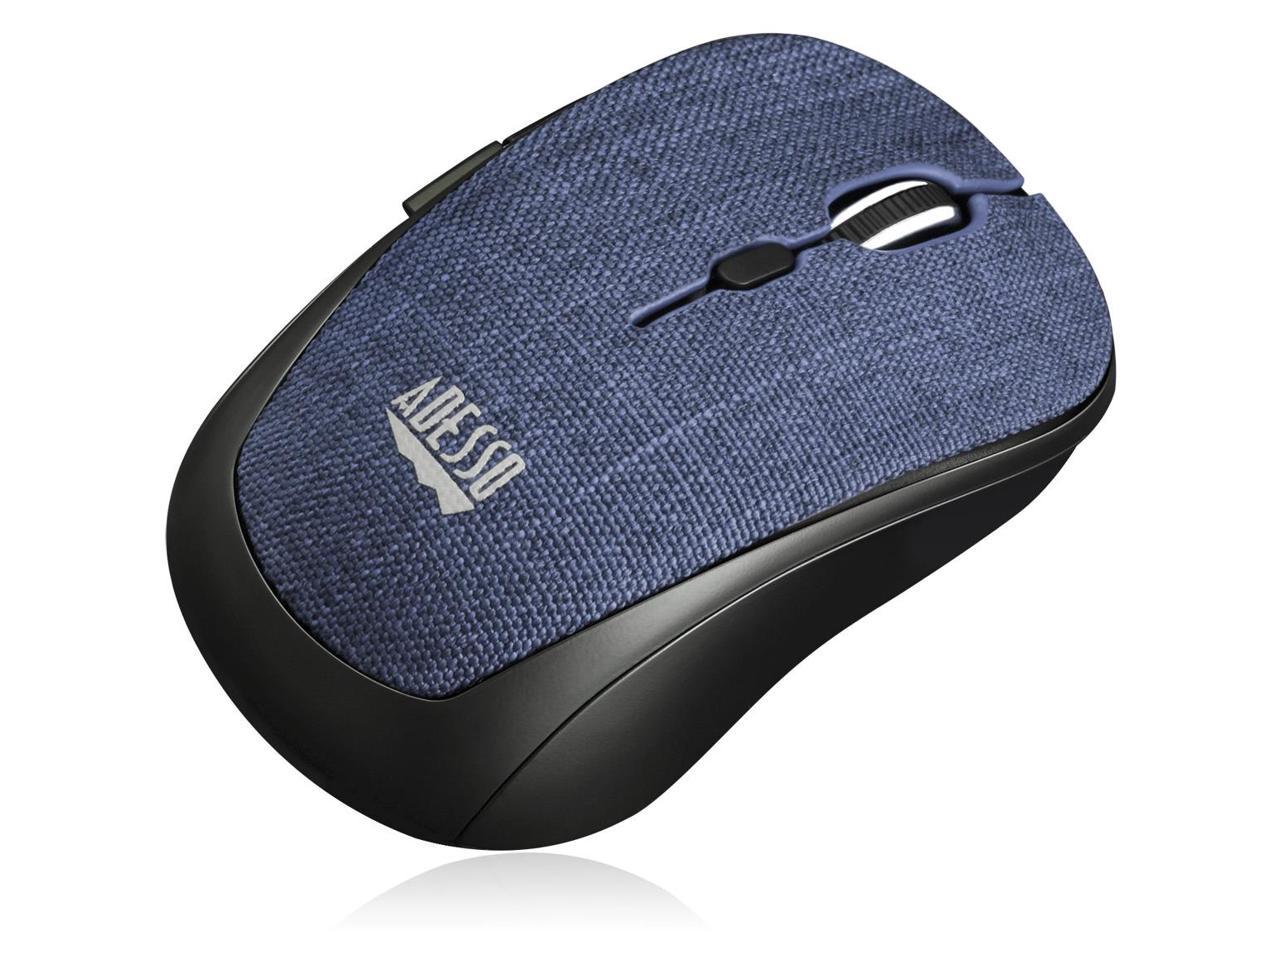 ADESSO INC. IMOUSES80L Wireless Optical Fabric Mouse